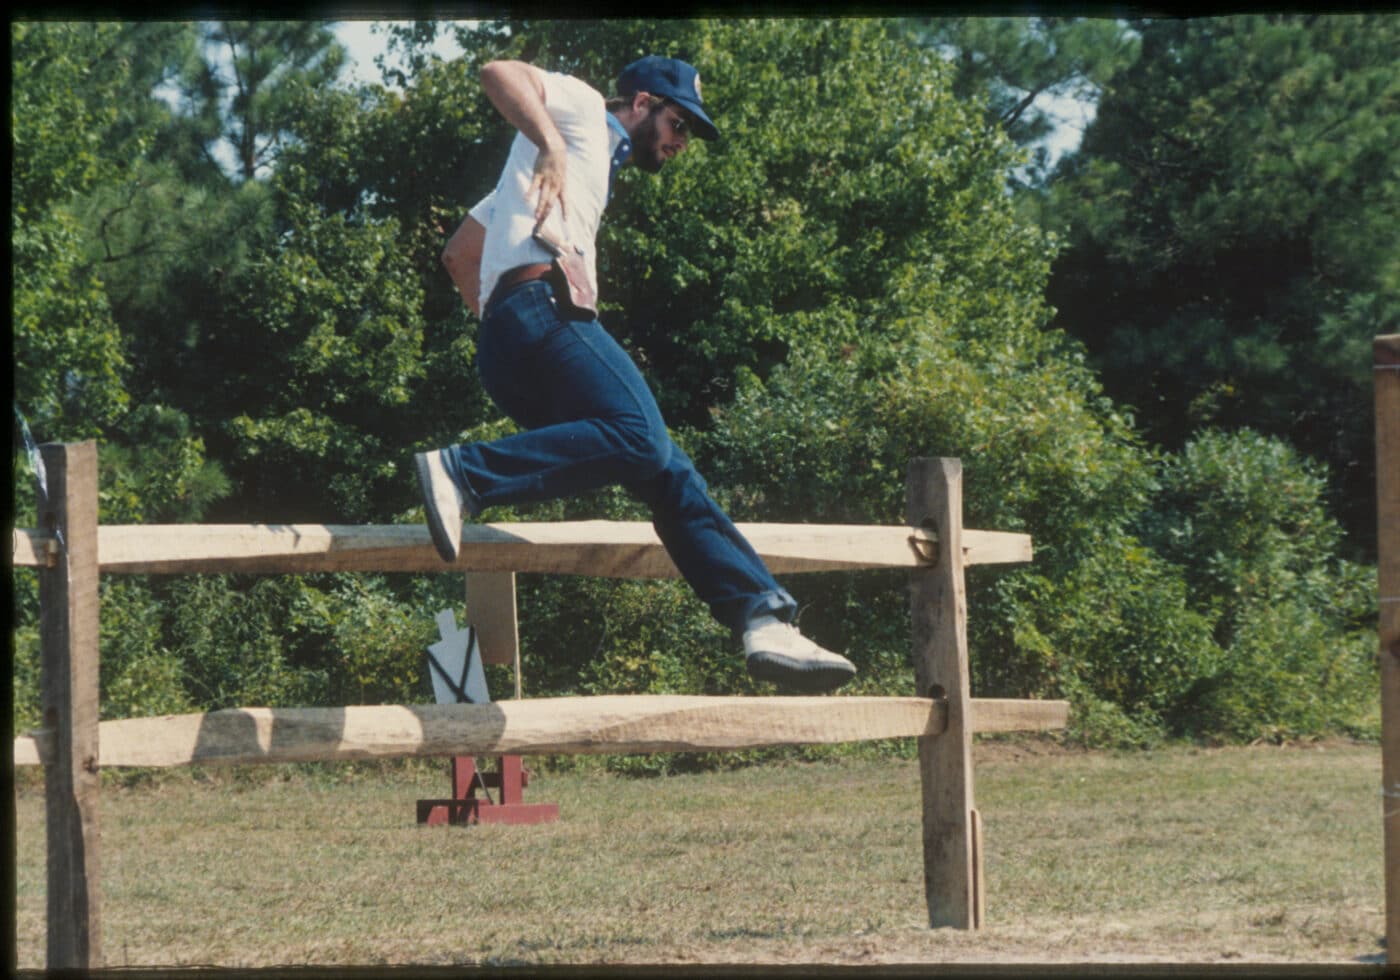 Rob Leatham jumping a fence in the 1983 IPSC World Shoot